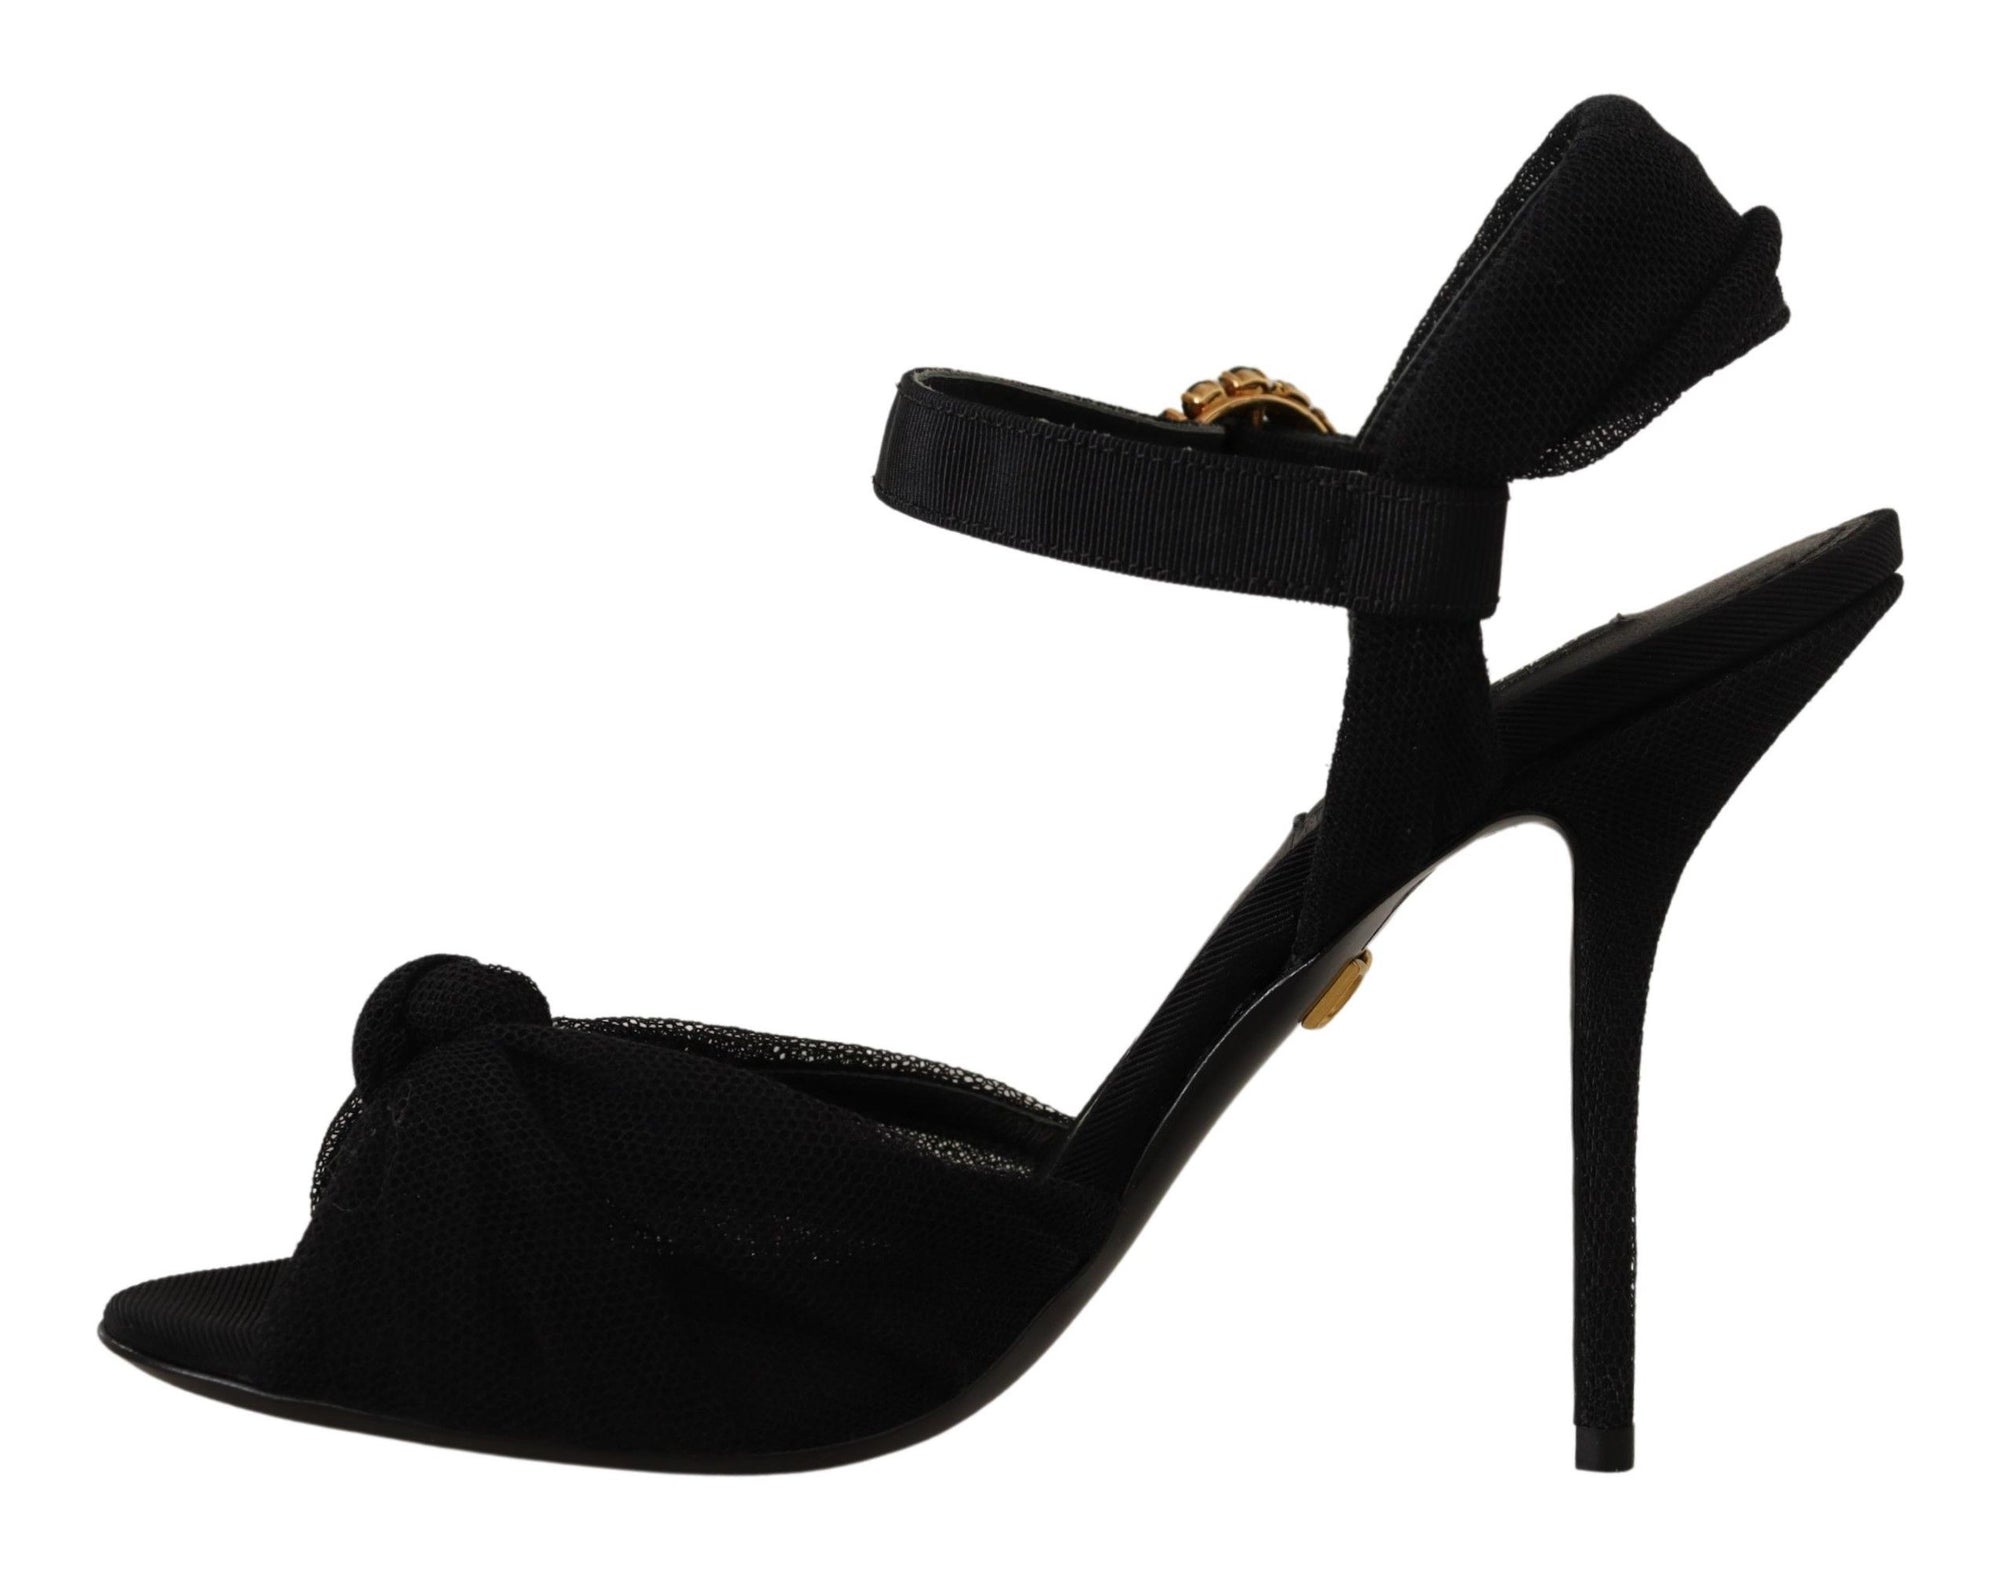 Black Tulle Ankle Strap Heels with Crystal Buckle